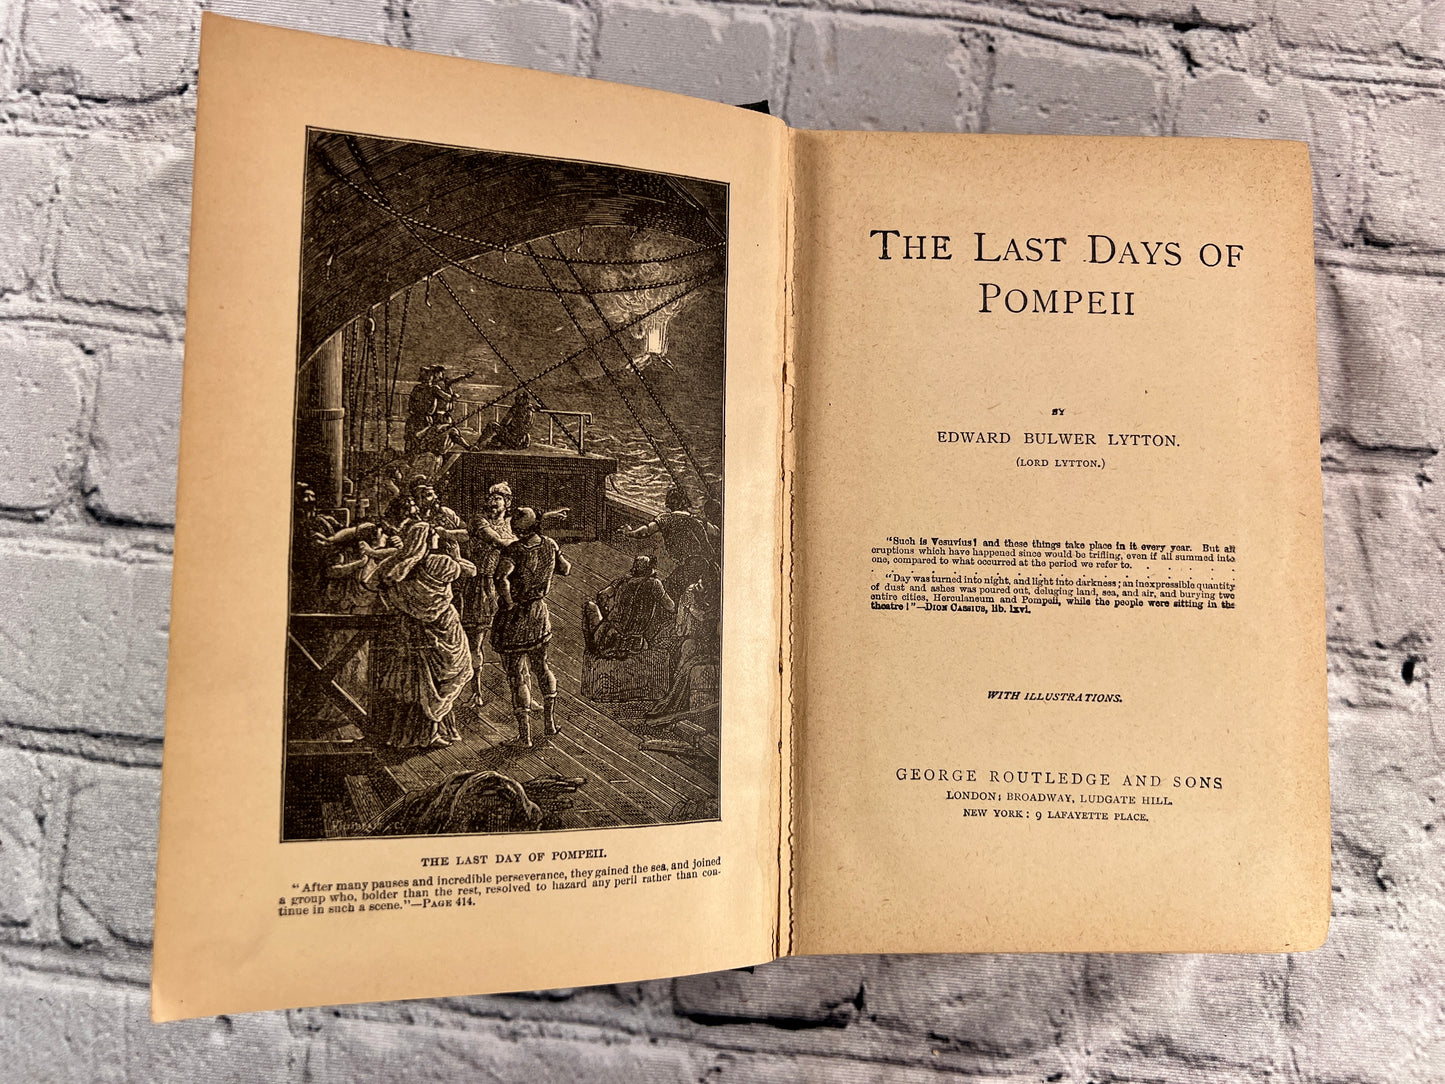 The Last Days of Pompeii by Edward Bulwer Lytton [Late 1880s]